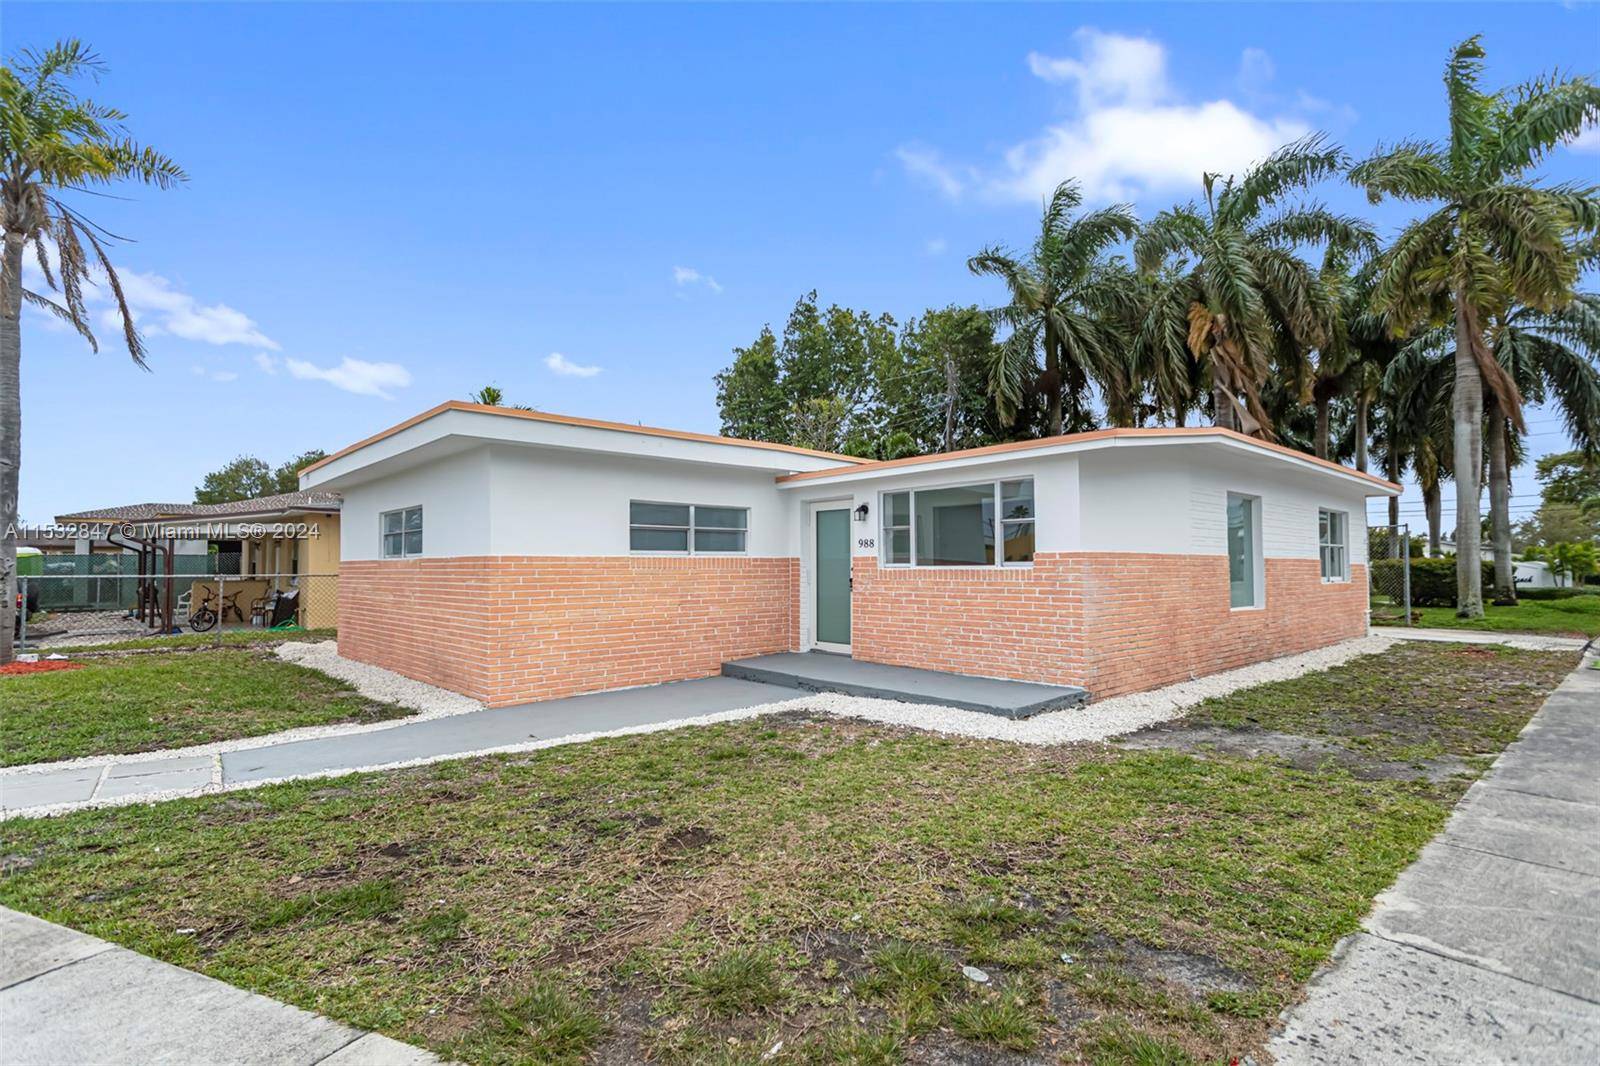 3Bed 2Bath Home in Hallandale.